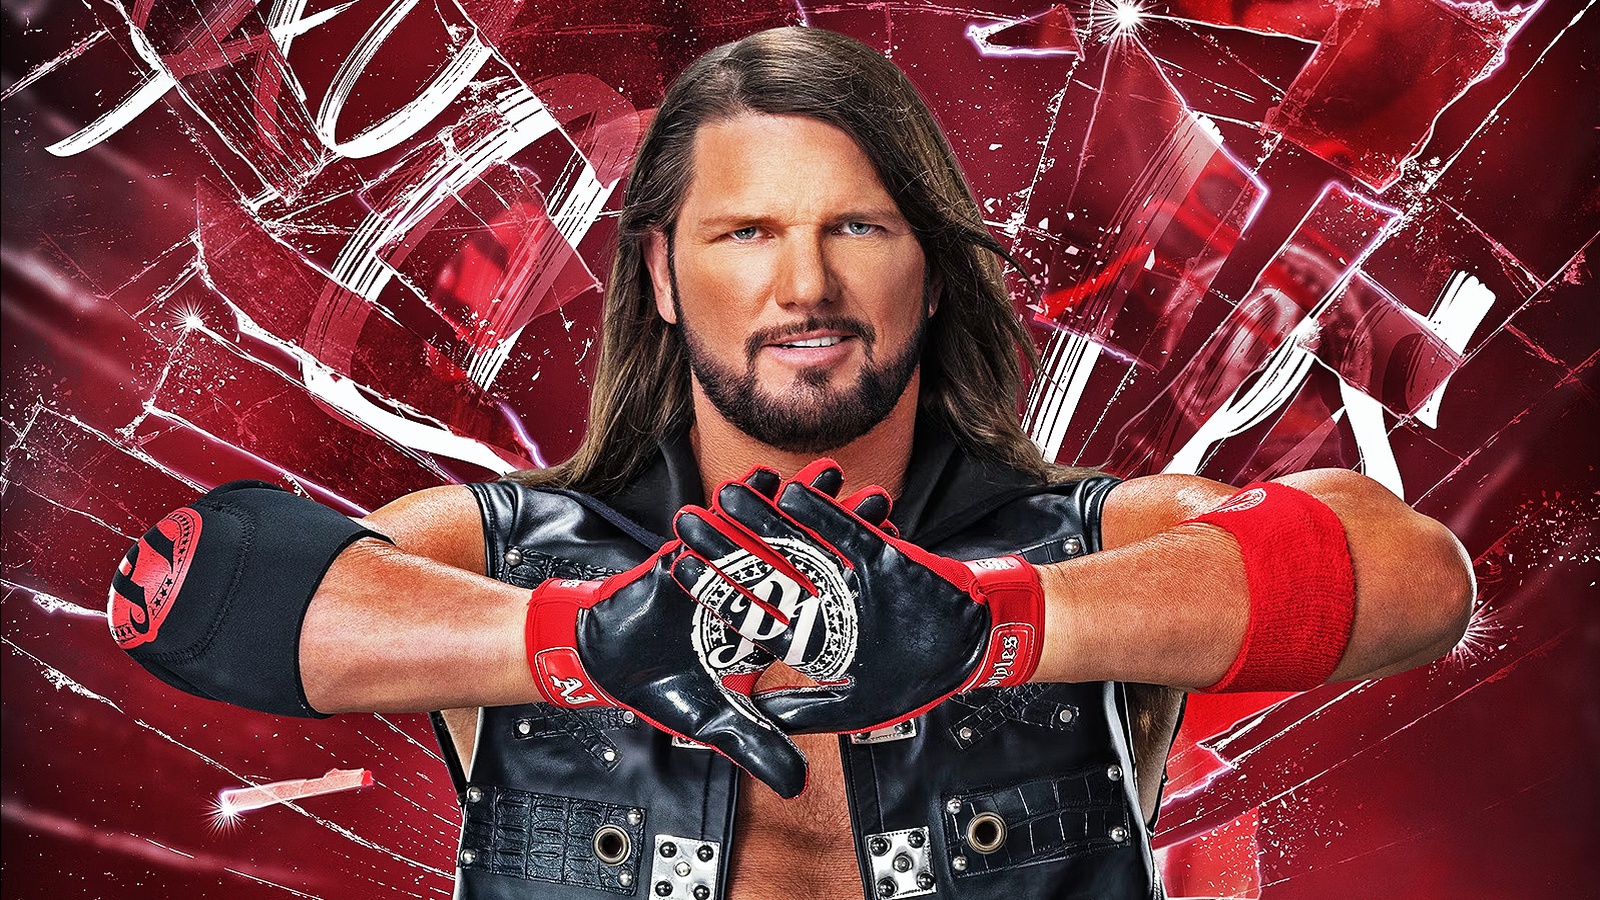 Interview with WWE star AJ Styles: "I love Italian fans, I would be nothing without them"